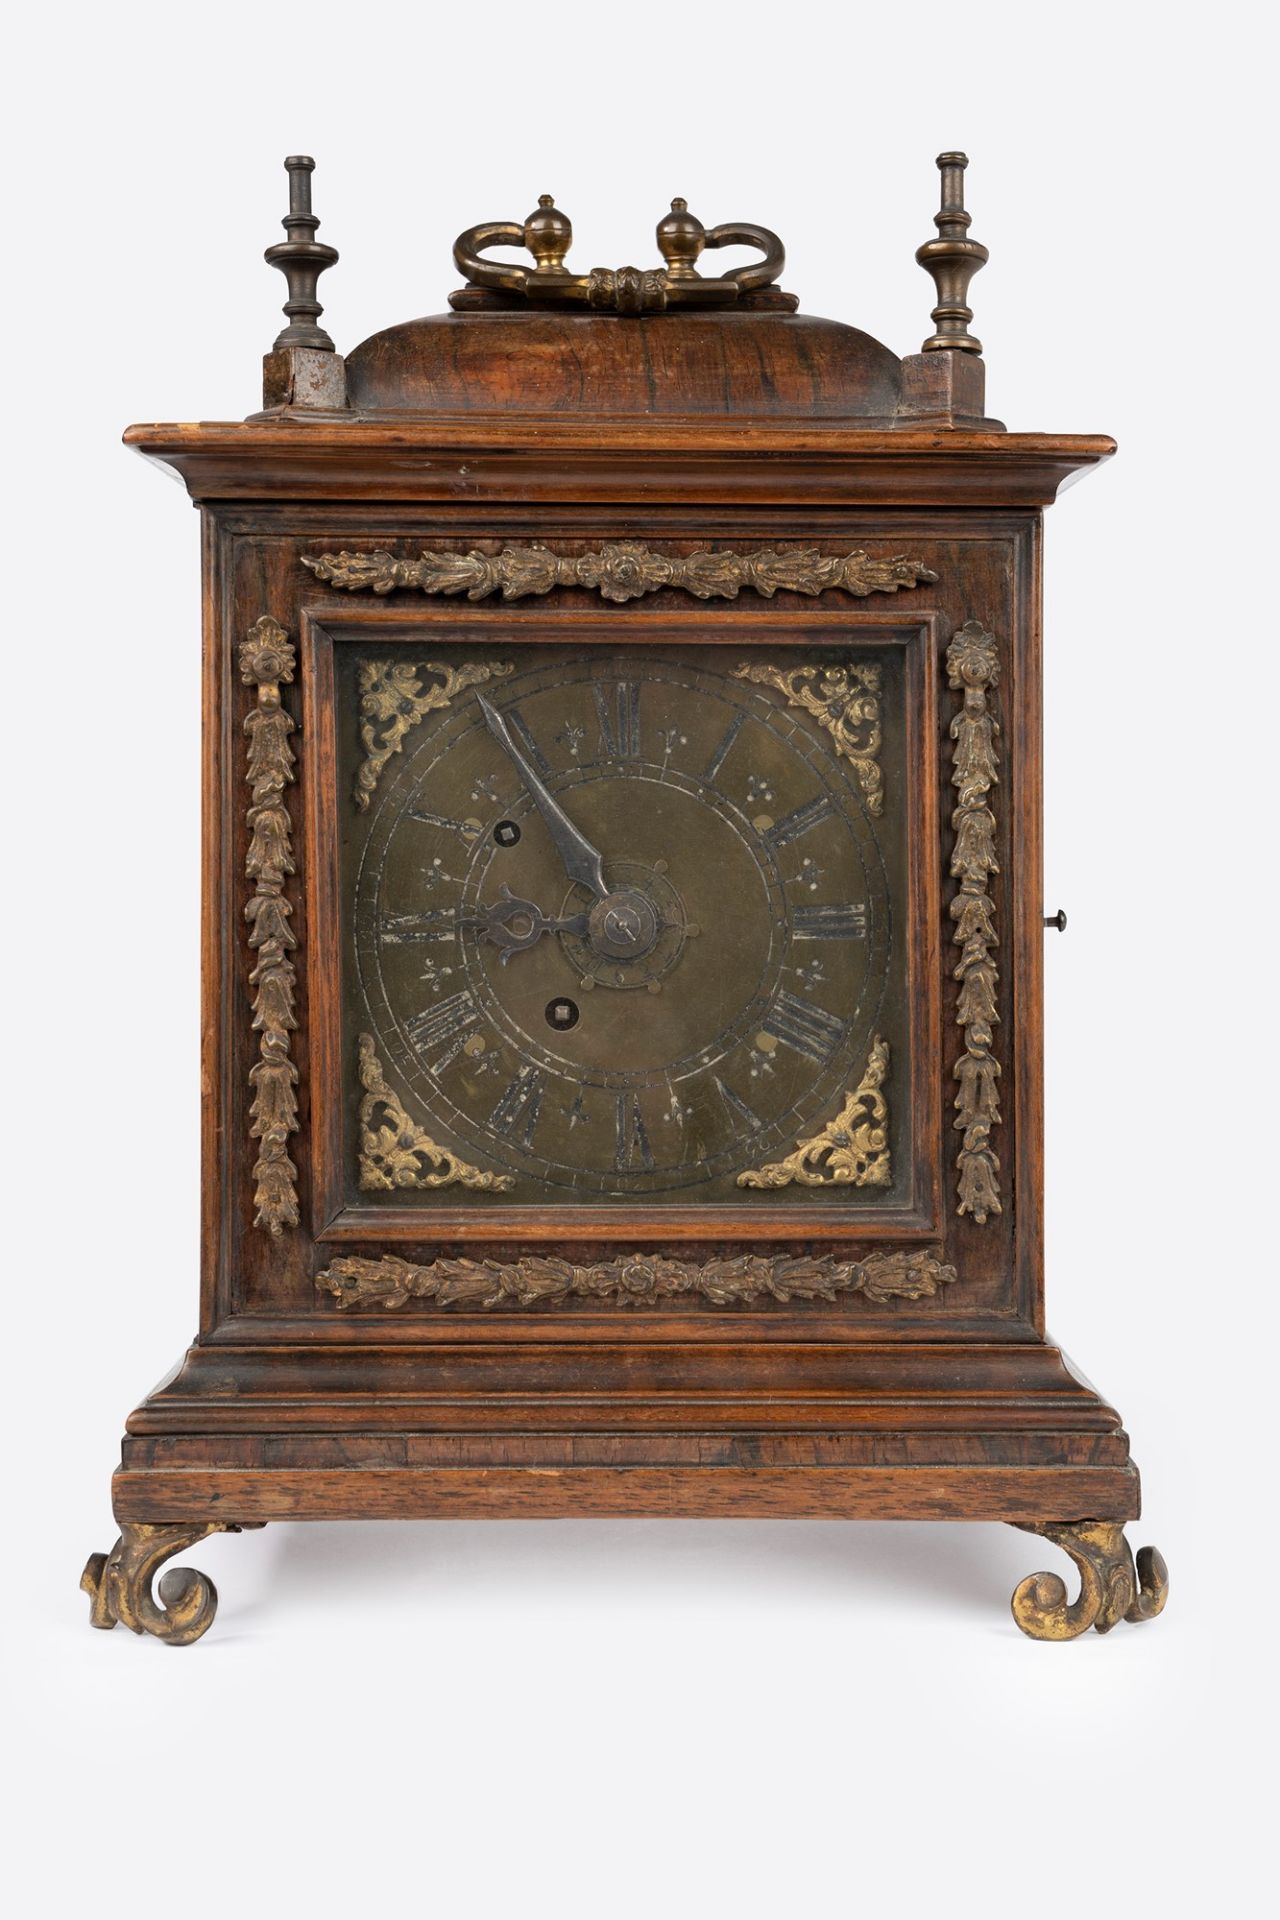 Table clock in wood and bronze, 18th century